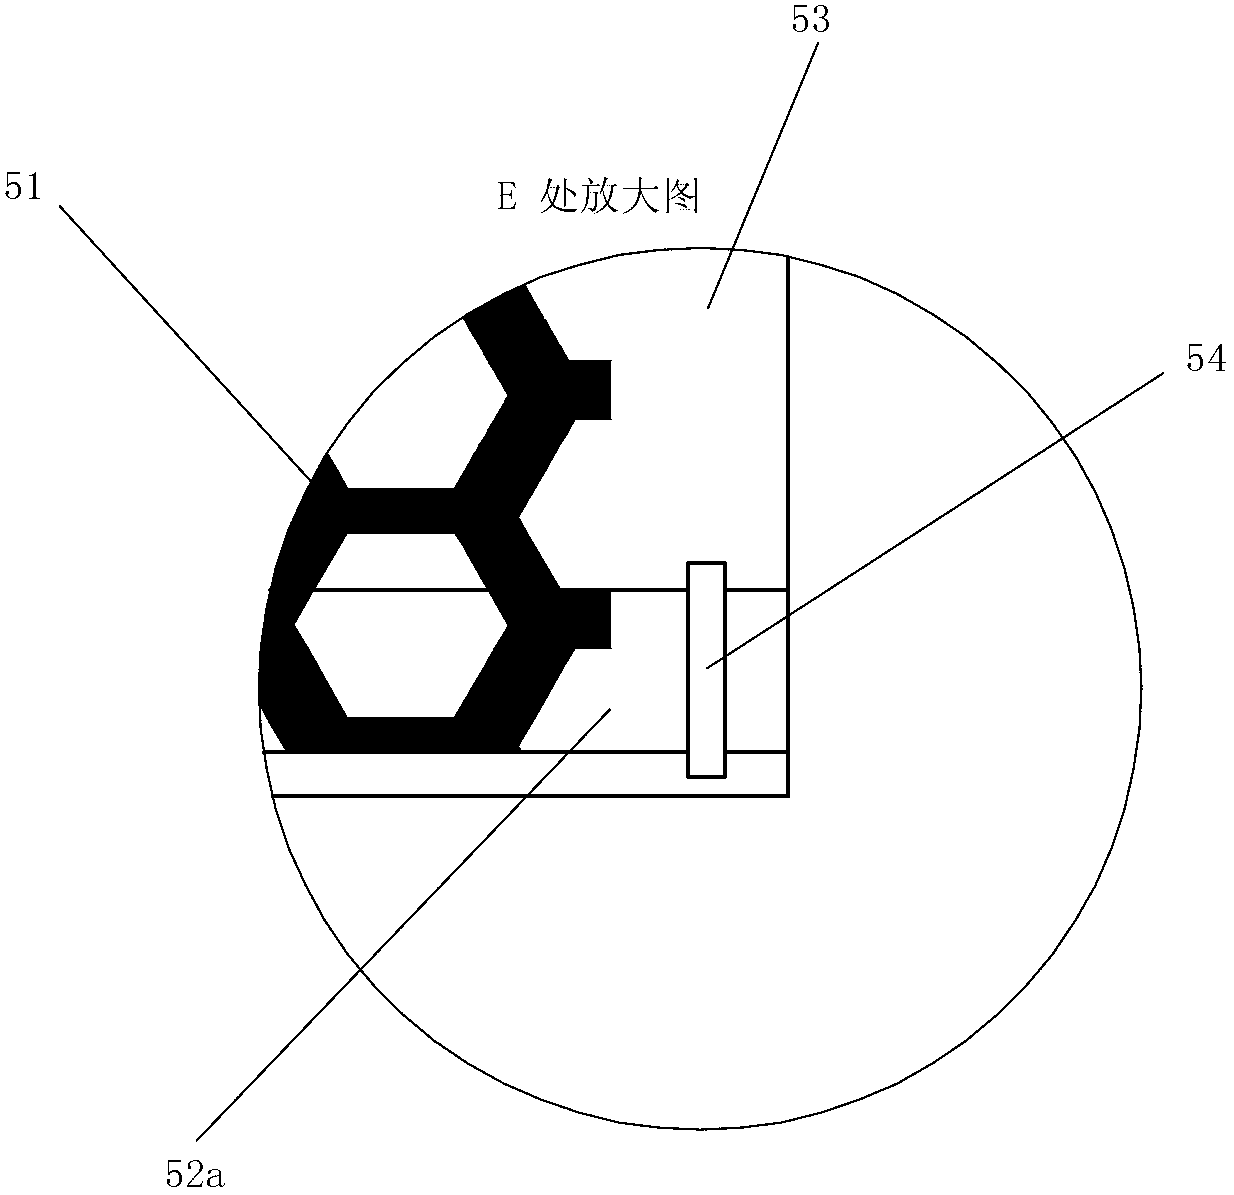 Self-heating assembly